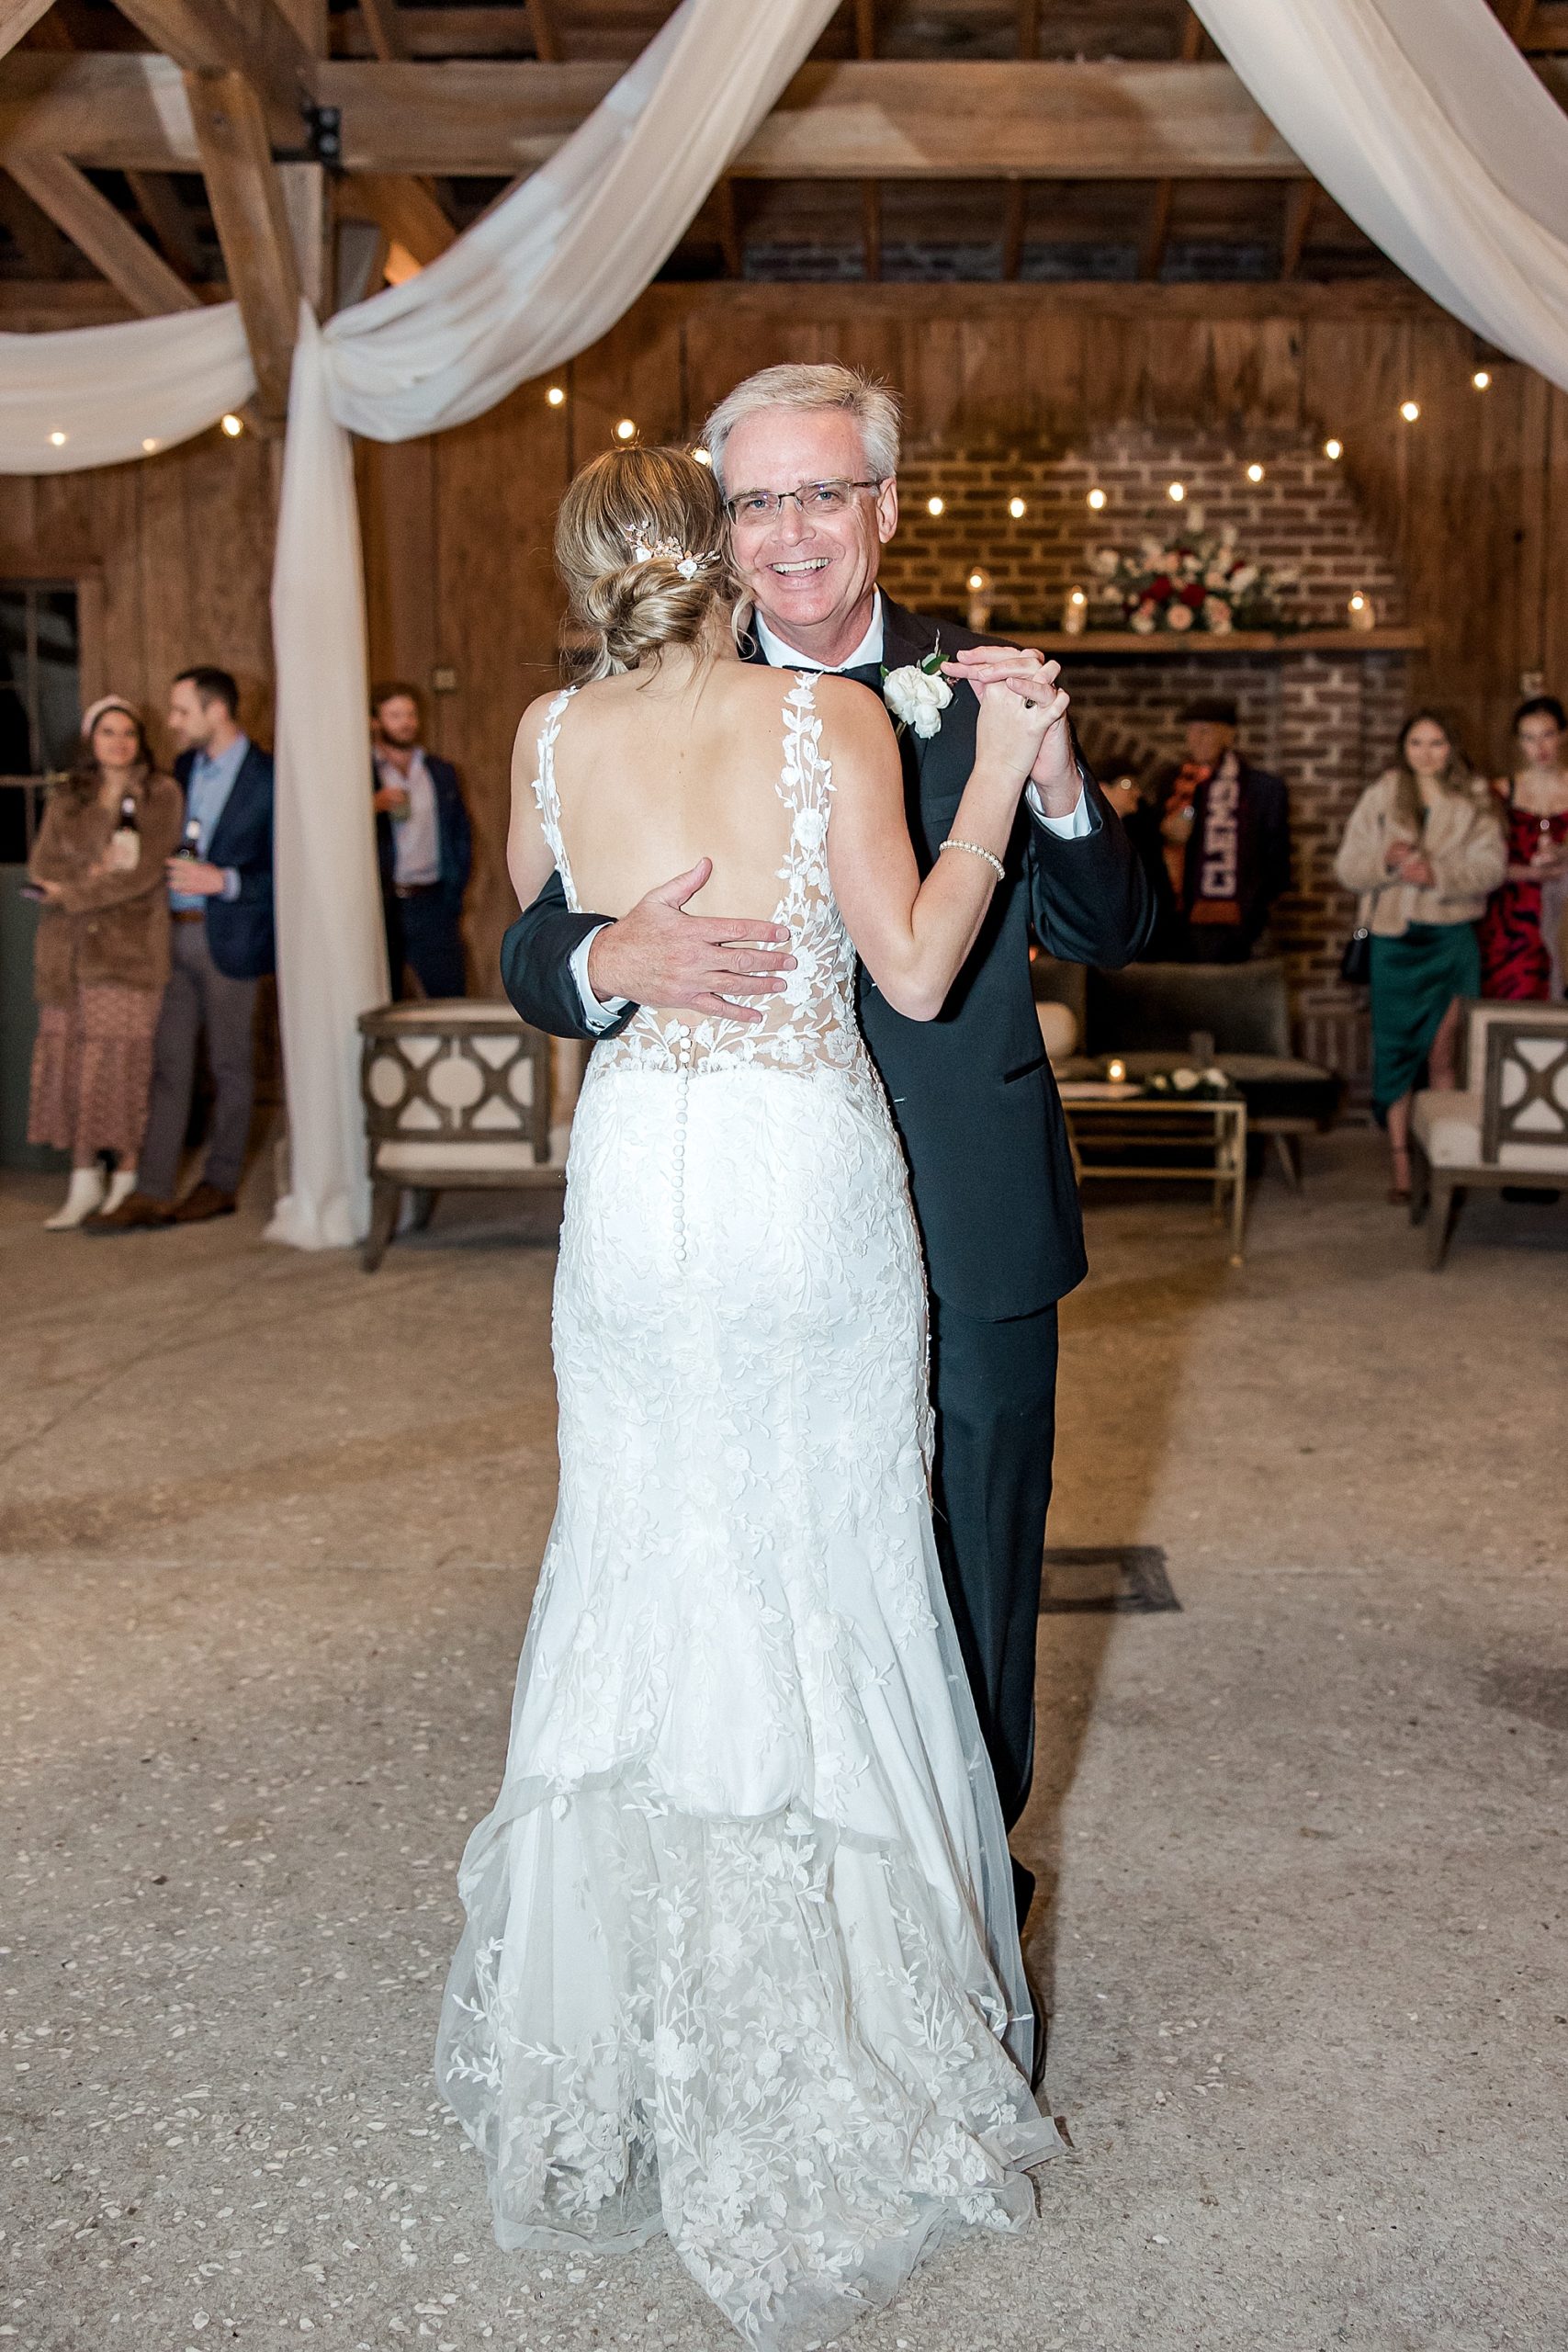 bride shares dance with her dad